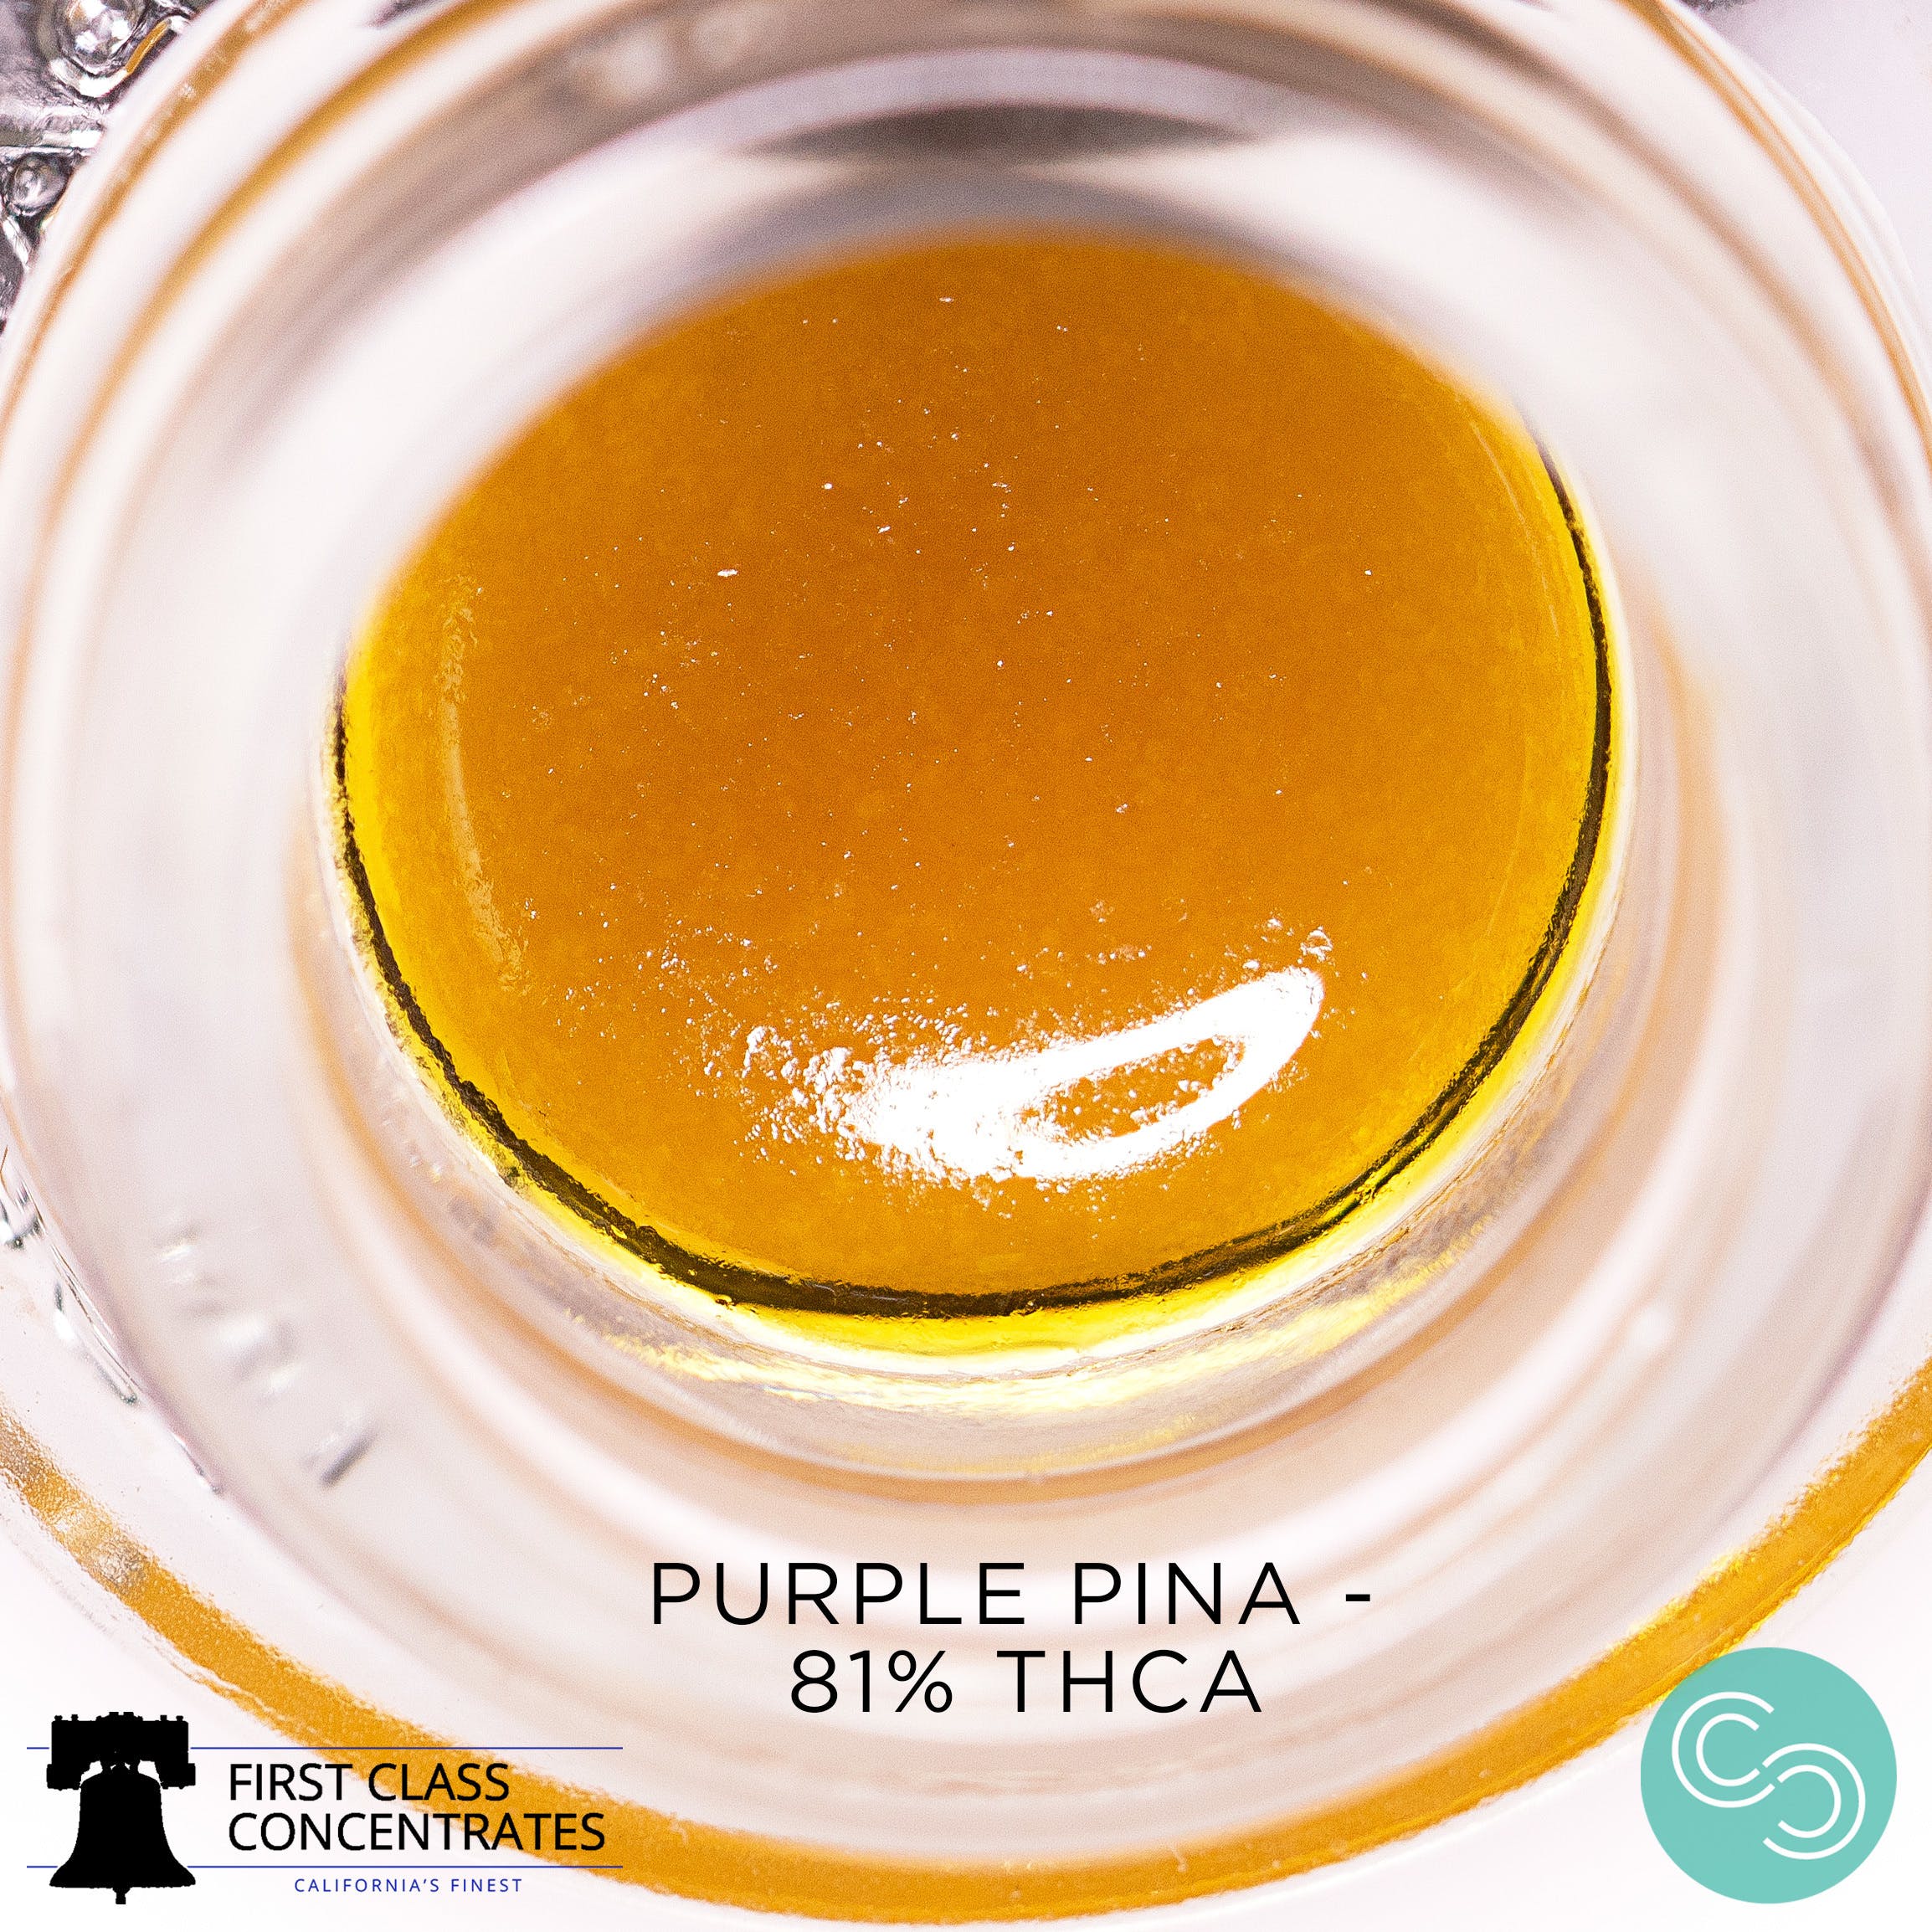 First Class Concentrates - Purple Pina - 81% THCA